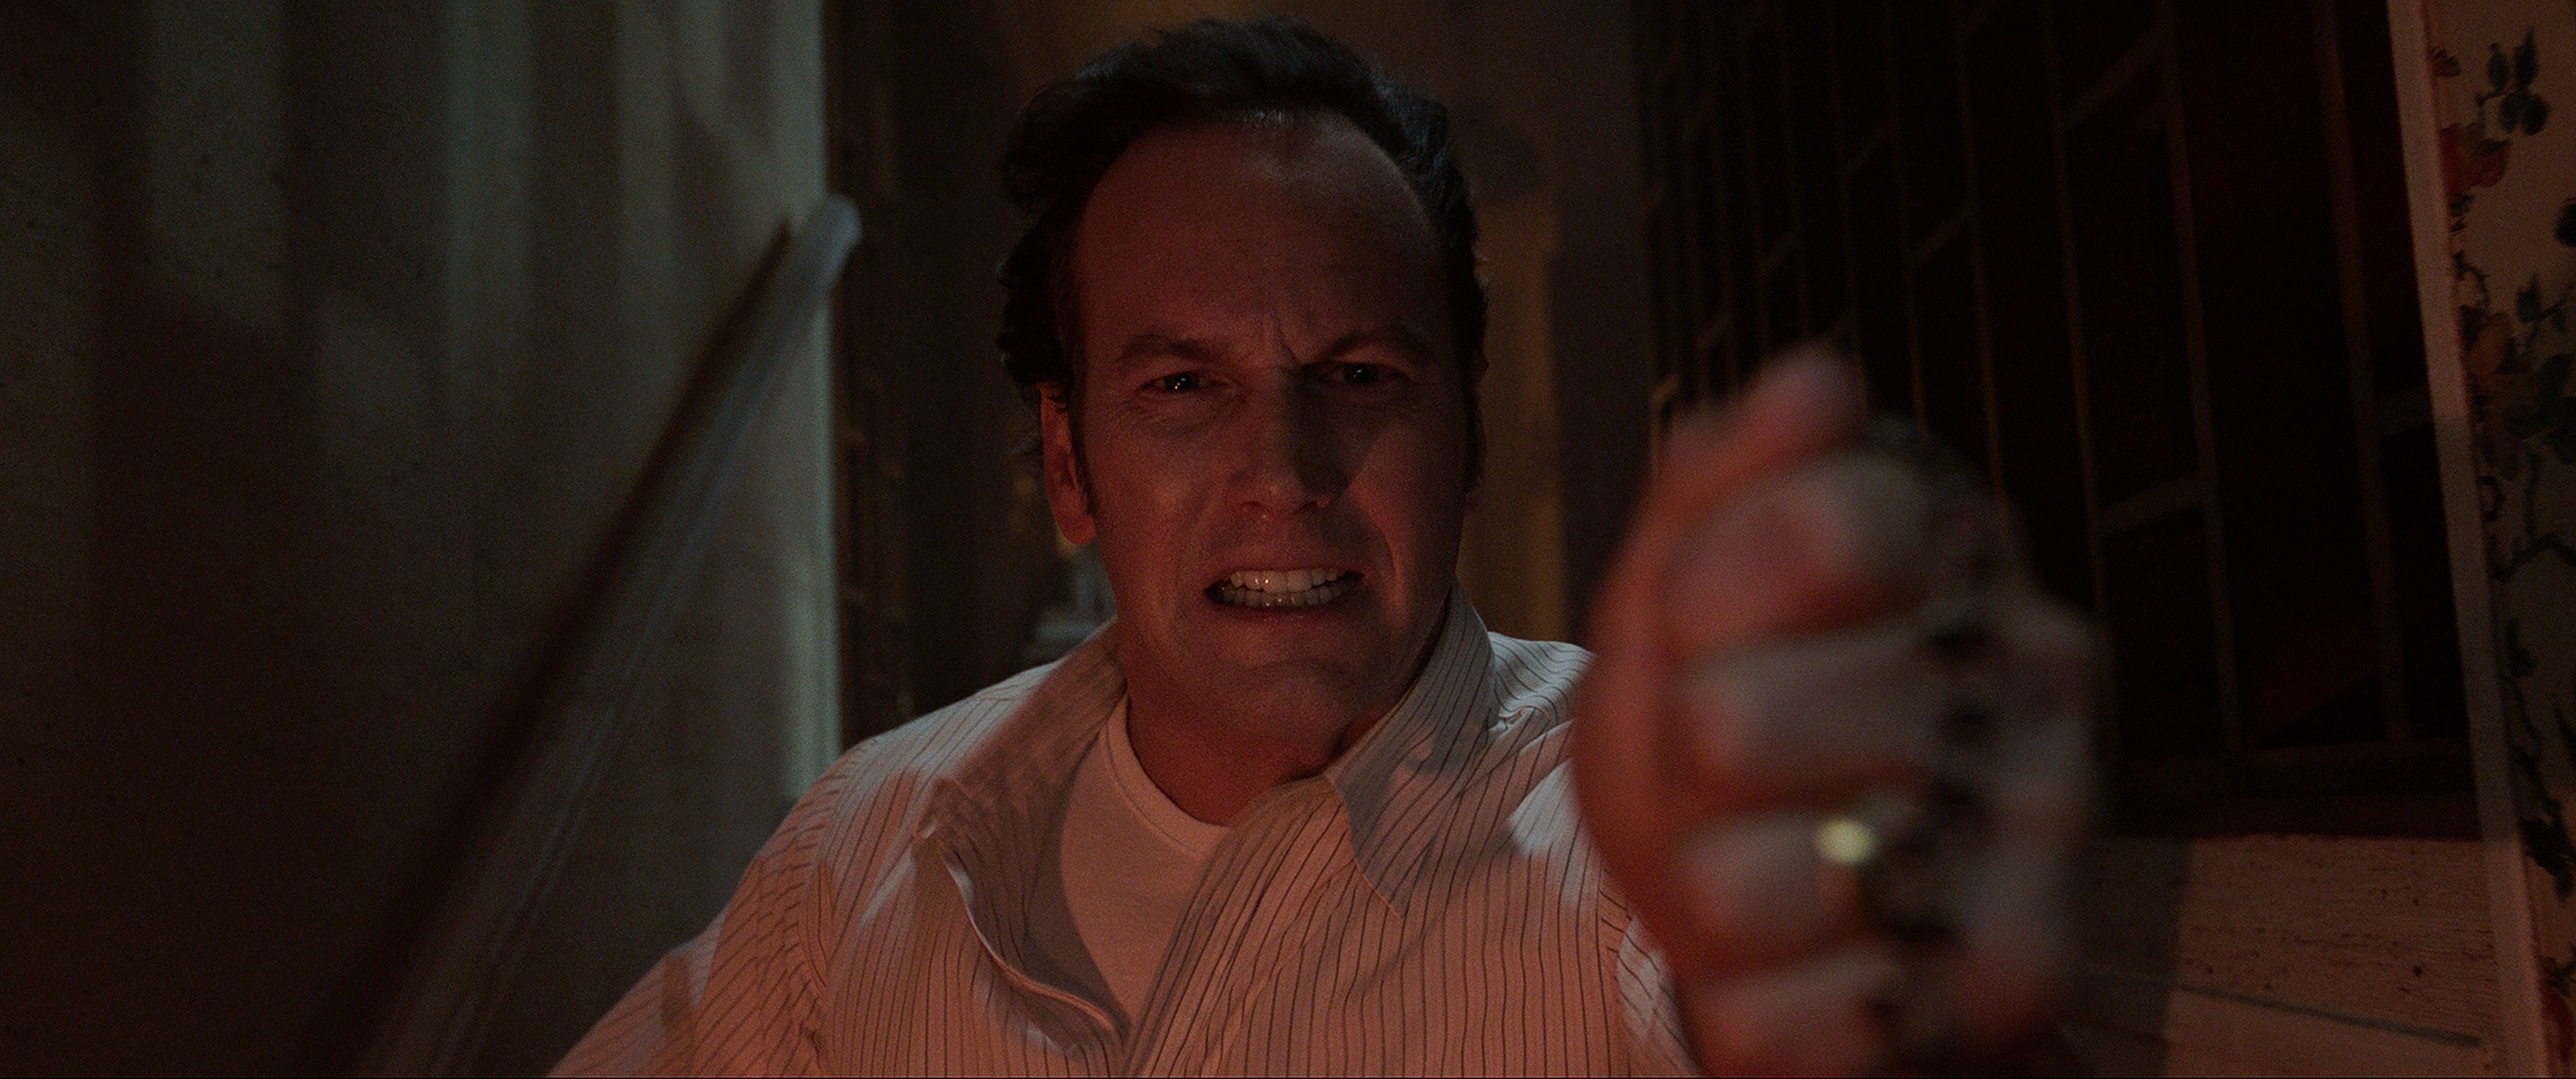 The Conjuring 3: Patrick Wilson holds a rosary during an exorcism